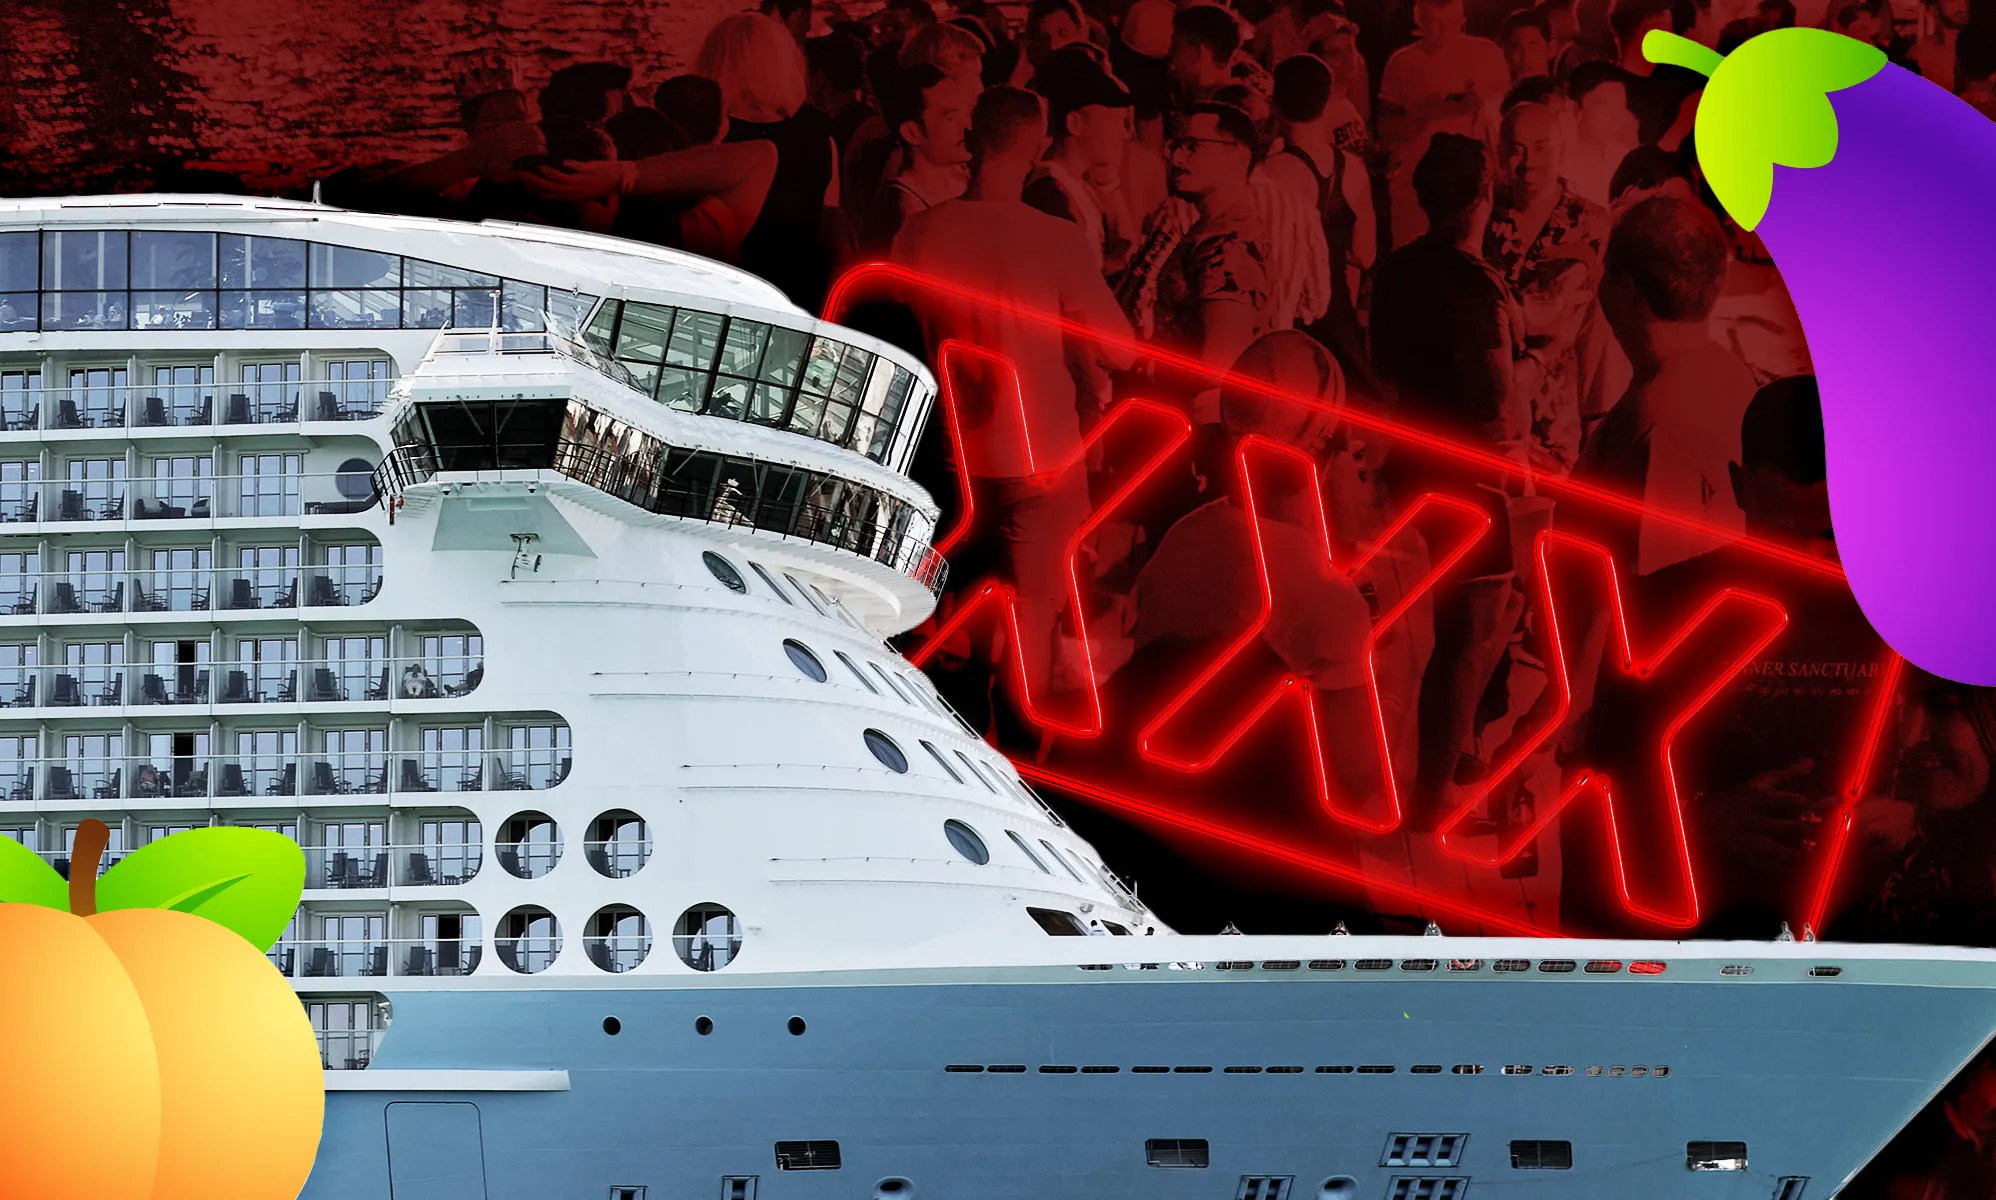 Forced Xxx Poran Videos In River - Gay cruise wants guests to stop making porn on its ships